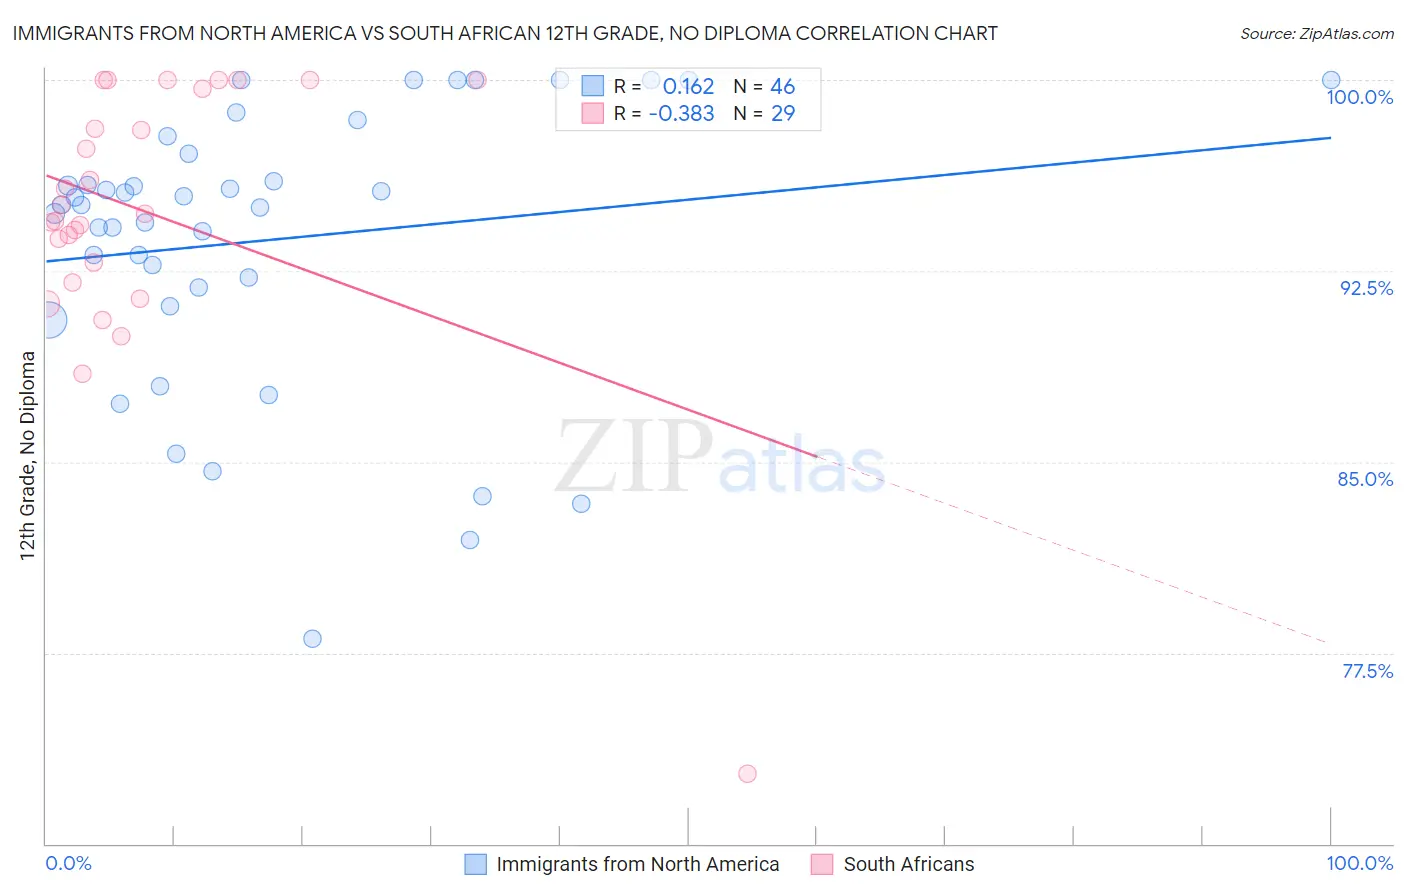 Immigrants from North America vs South African 12th Grade, No Diploma